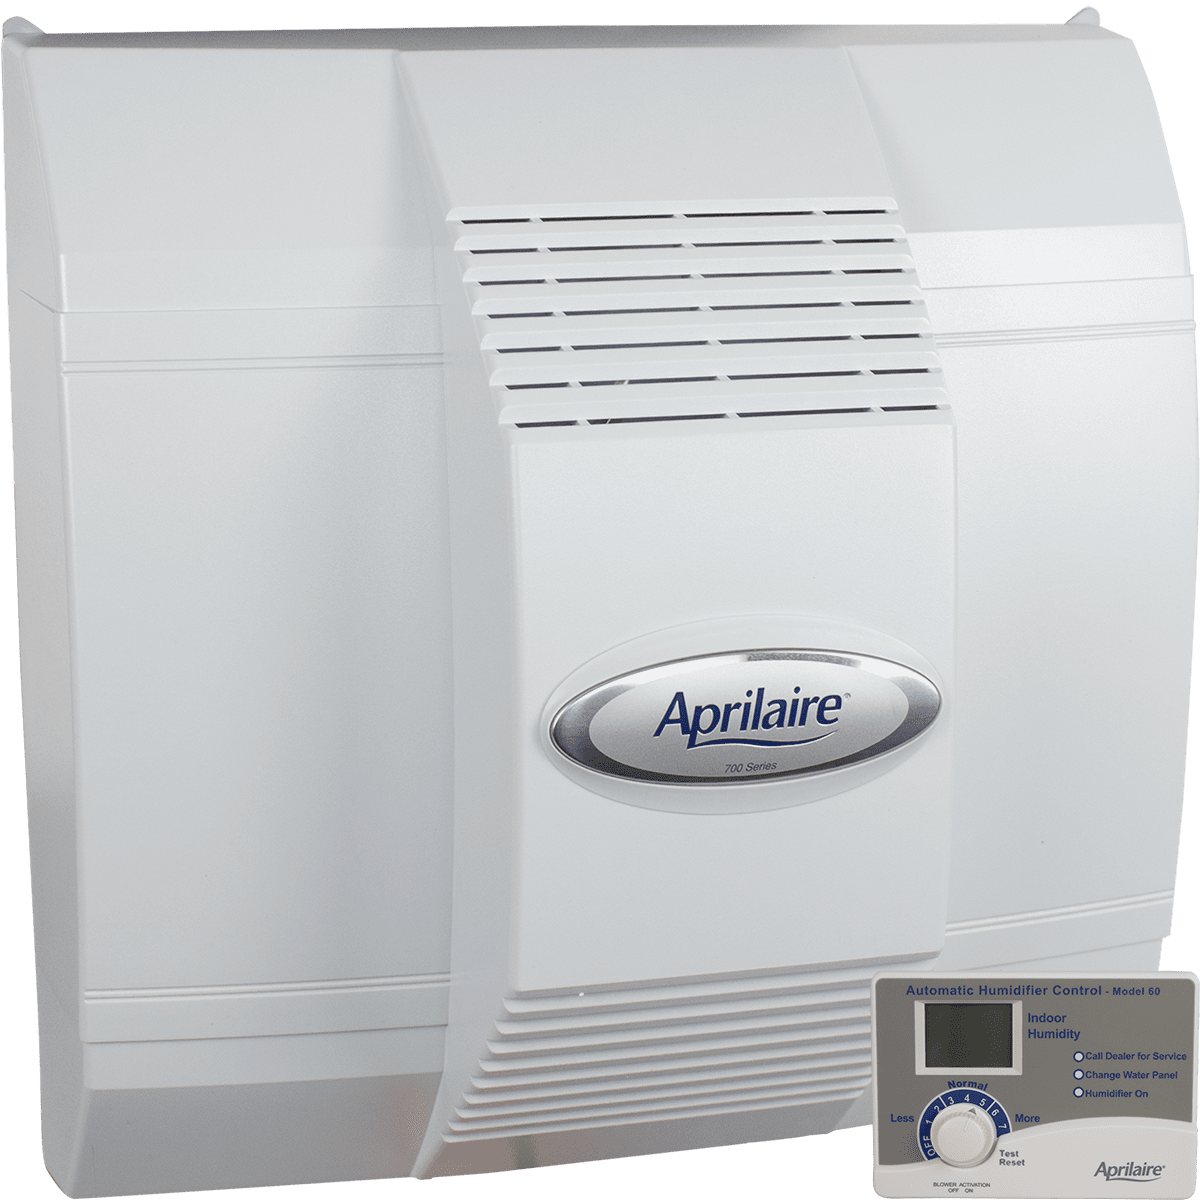 Aprilaire Model 700 Whole House Bypass Humidifiers - automatic control